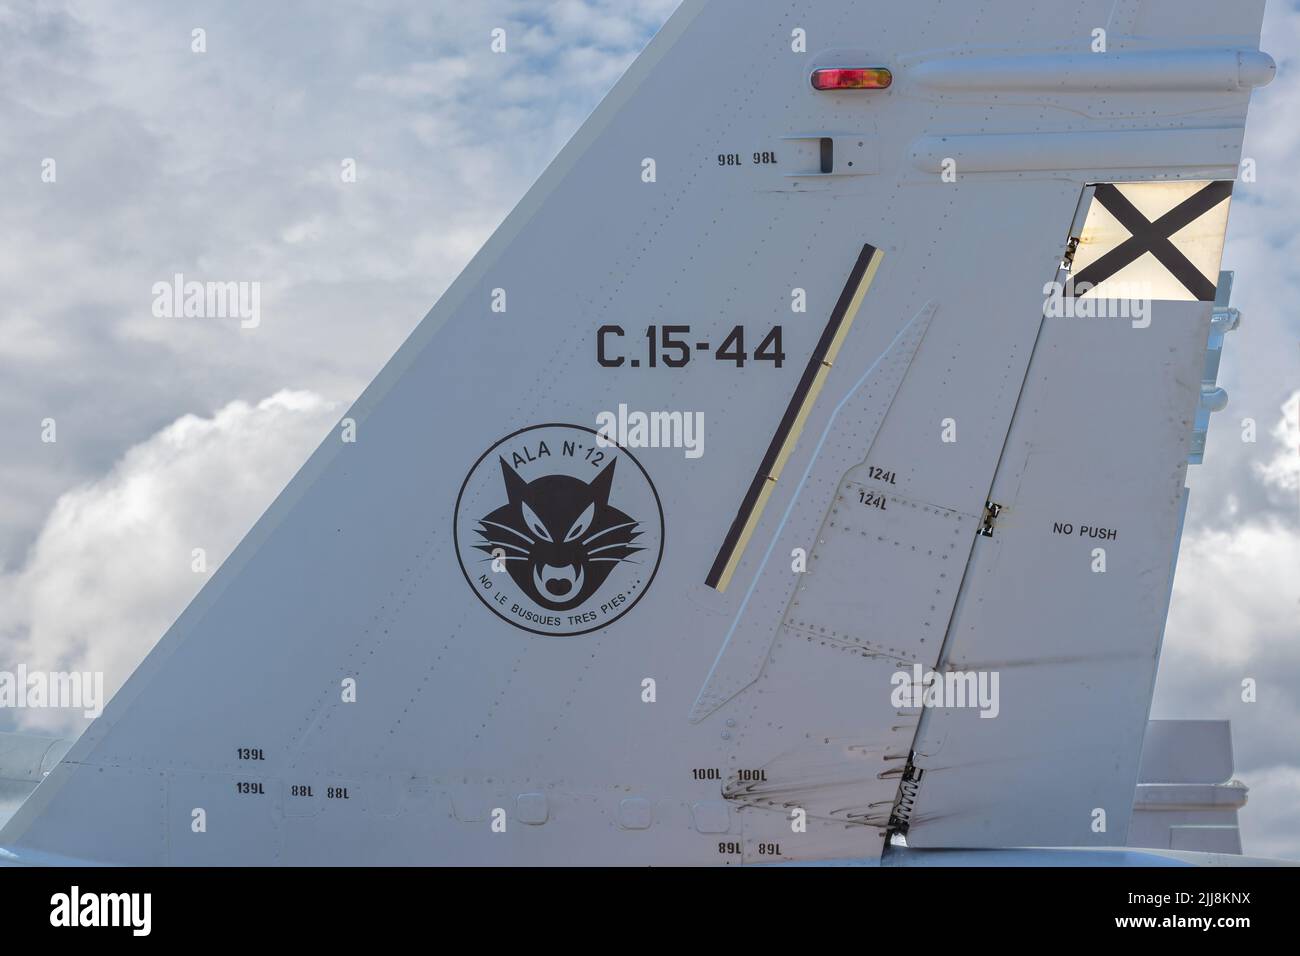 SIAULIAI / LITHUANIA - July 27, 2019: Vertical stabilizer of Spanish Air Force F-18 Hornet fighter jet aircraft Stock Photo